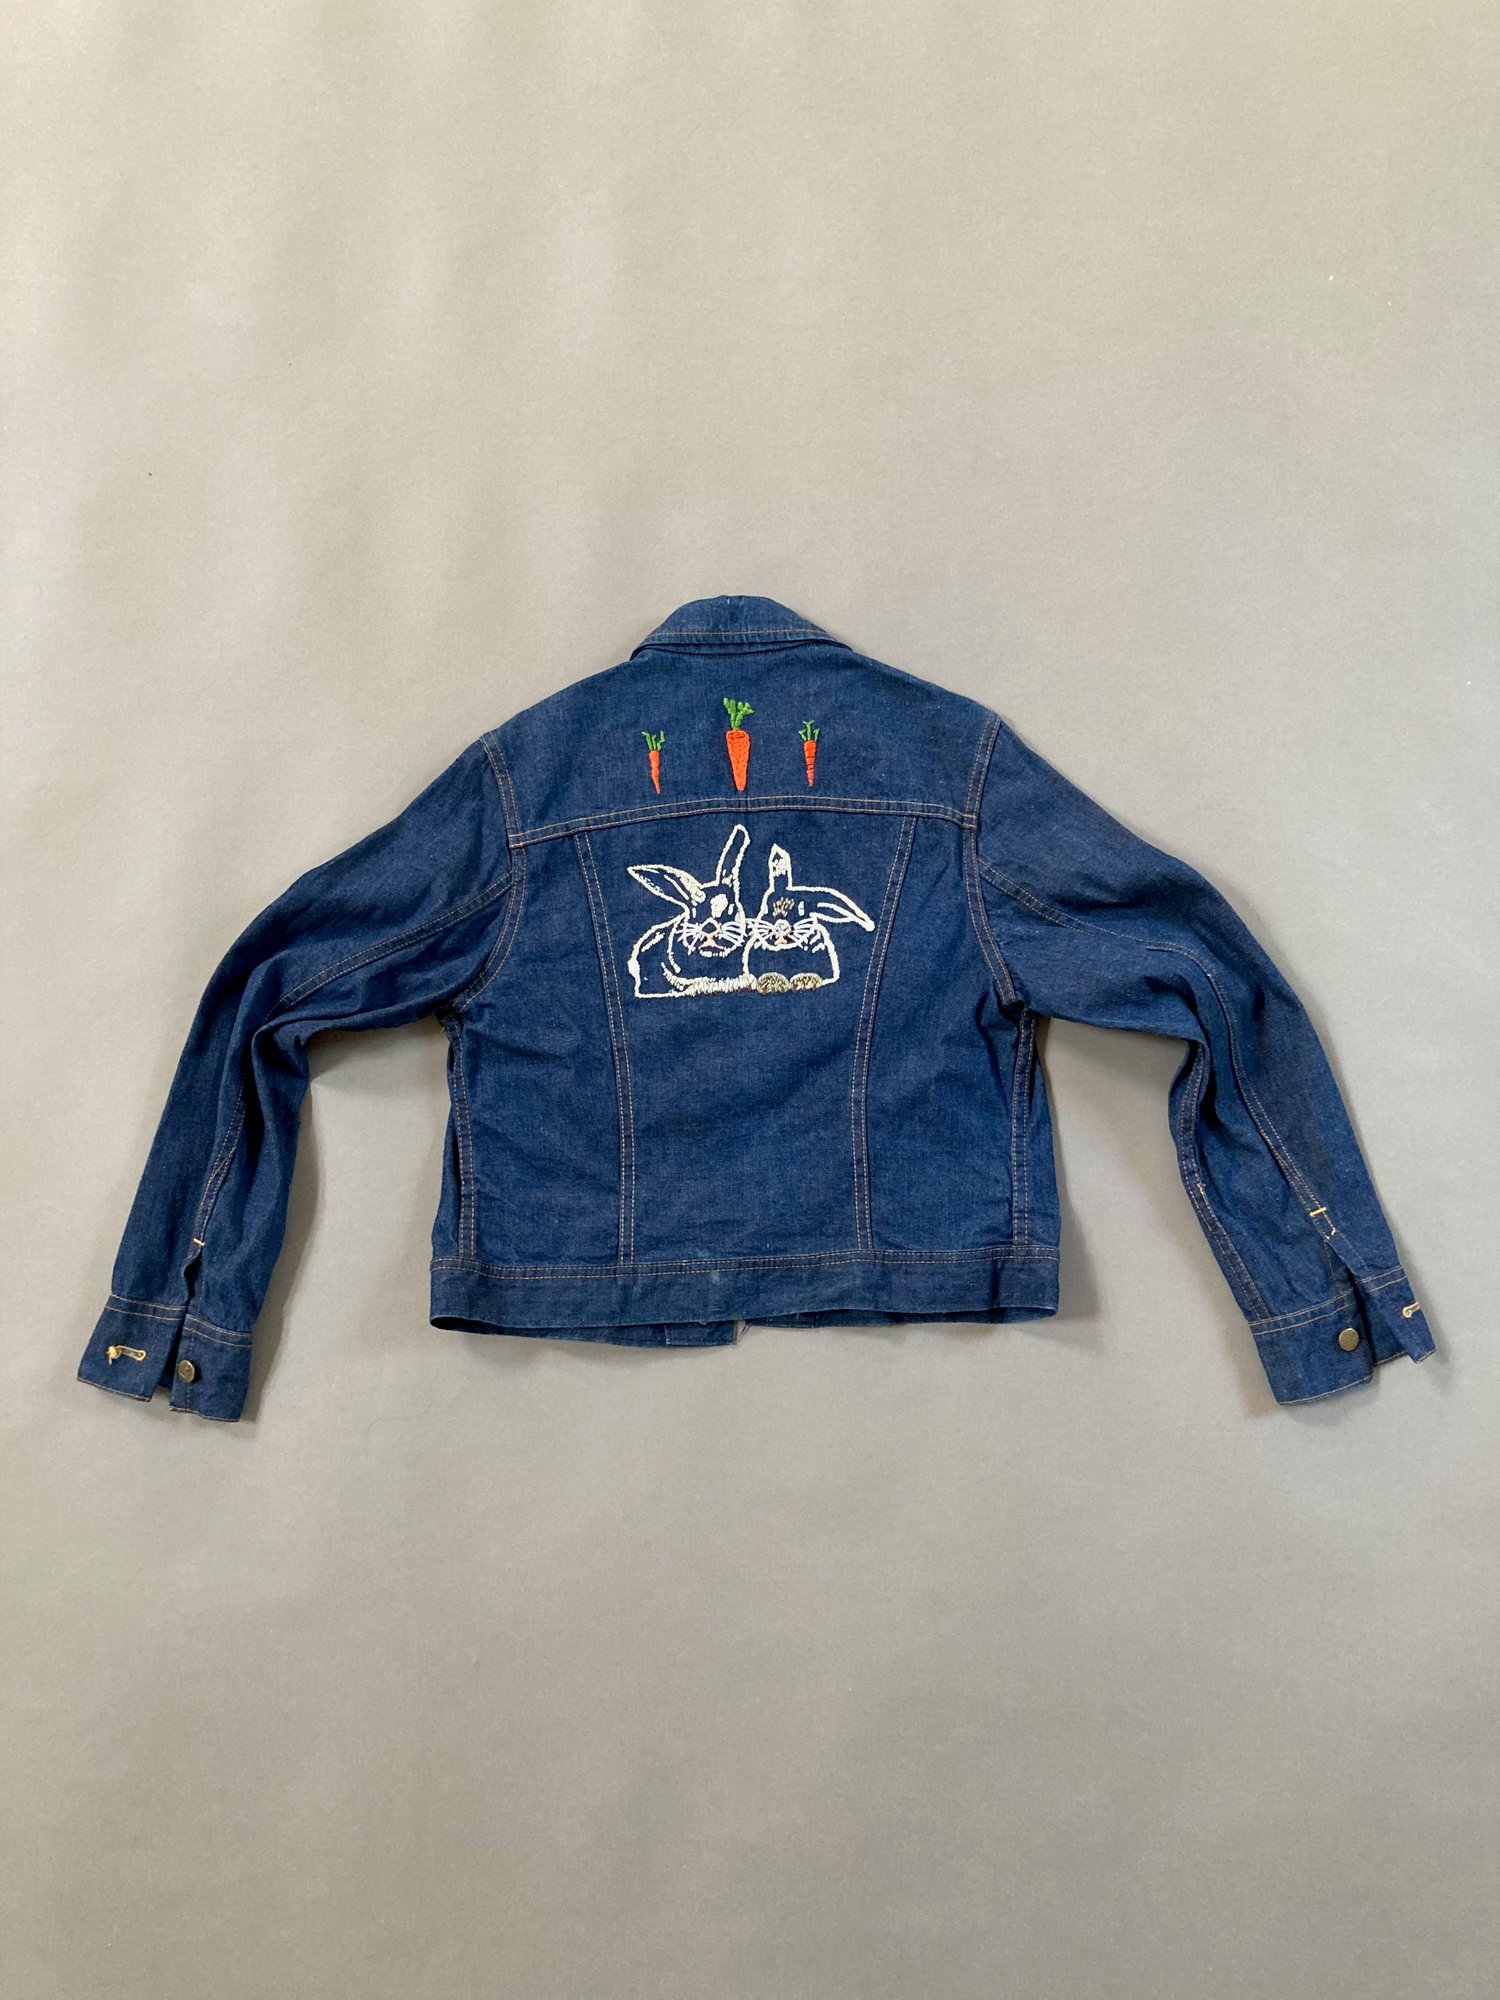 Image of Vintage Jean Jacket with Hand Embroidered Bunnies